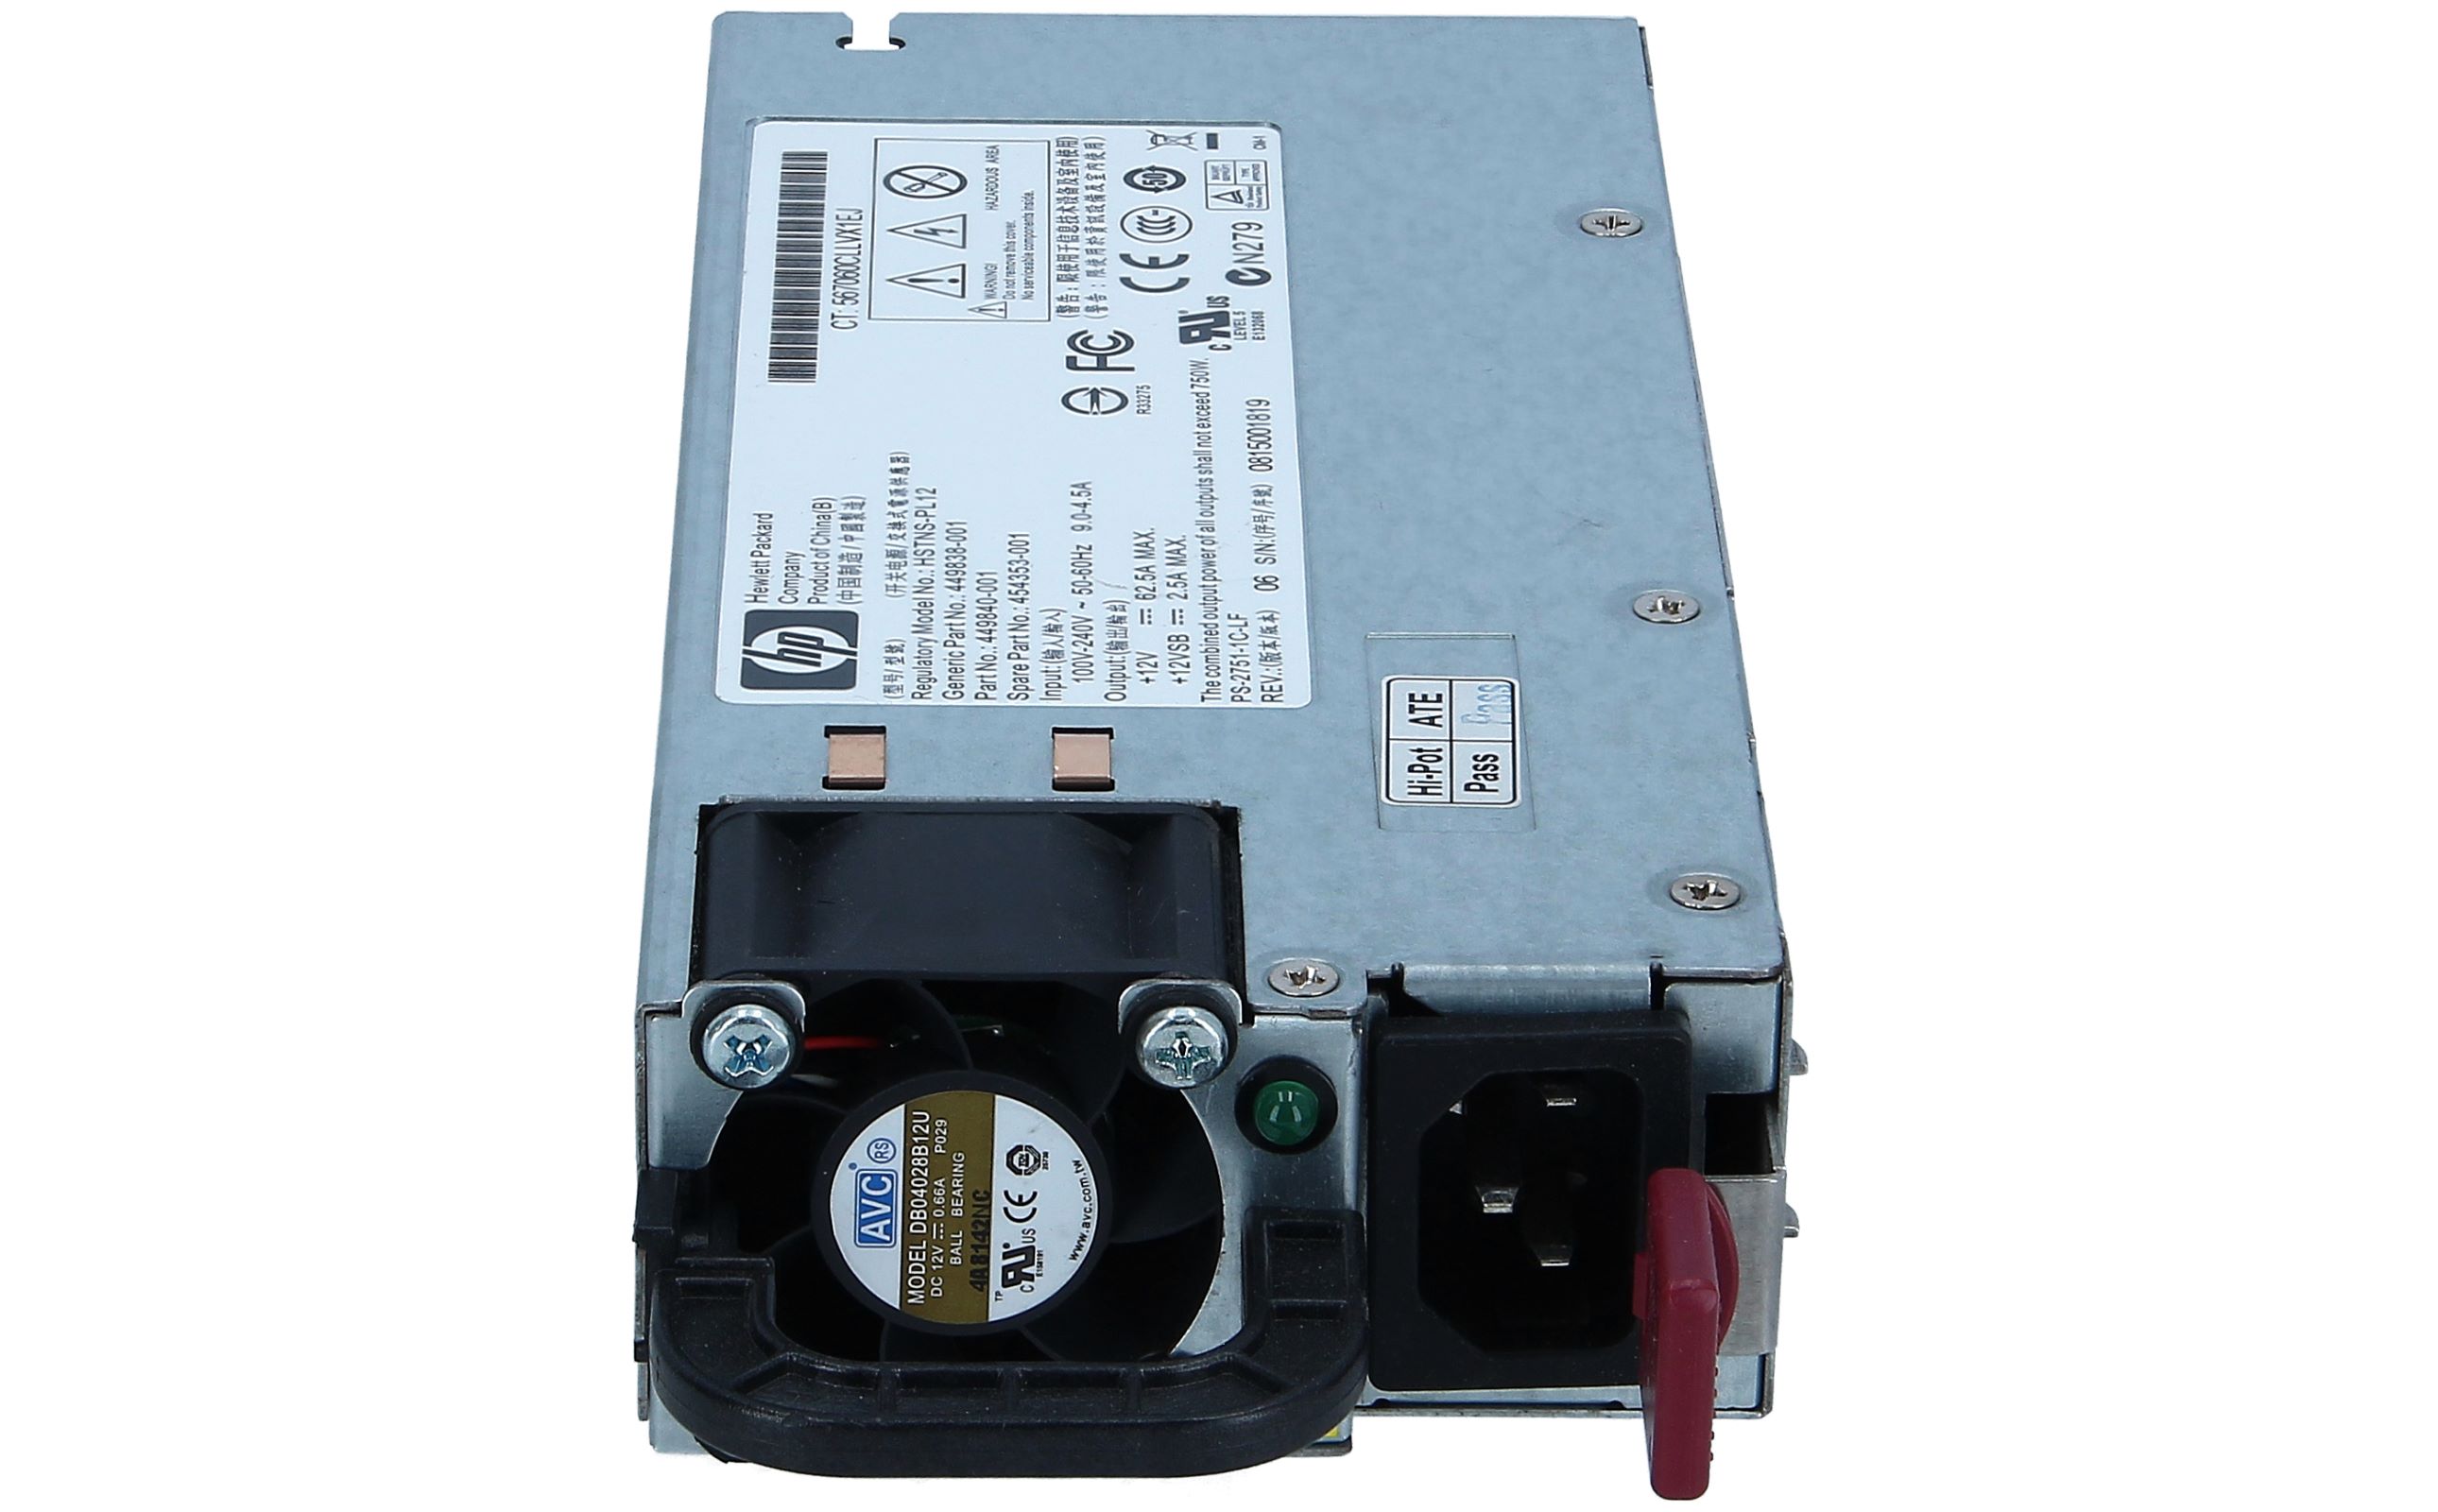 HP HSTNS-PL12 HP 750W 12V Hot Plug AC Power Supply new and refurbished  buy online low prices